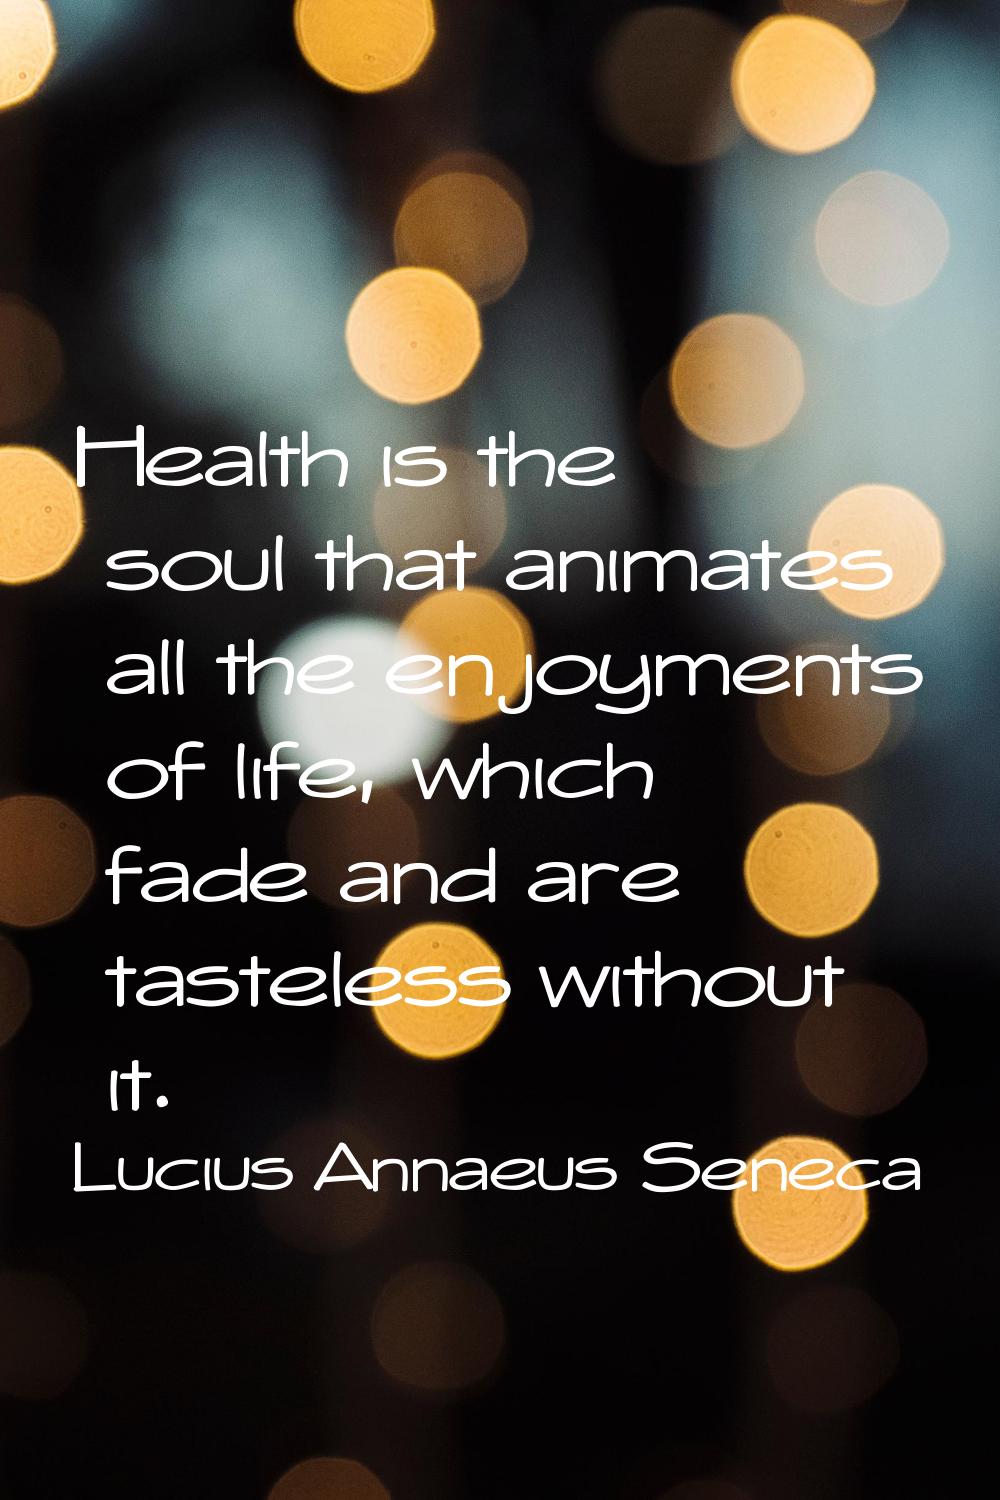 Health is the soul that animates all the enjoyments of life, which fade and are tasteless without i